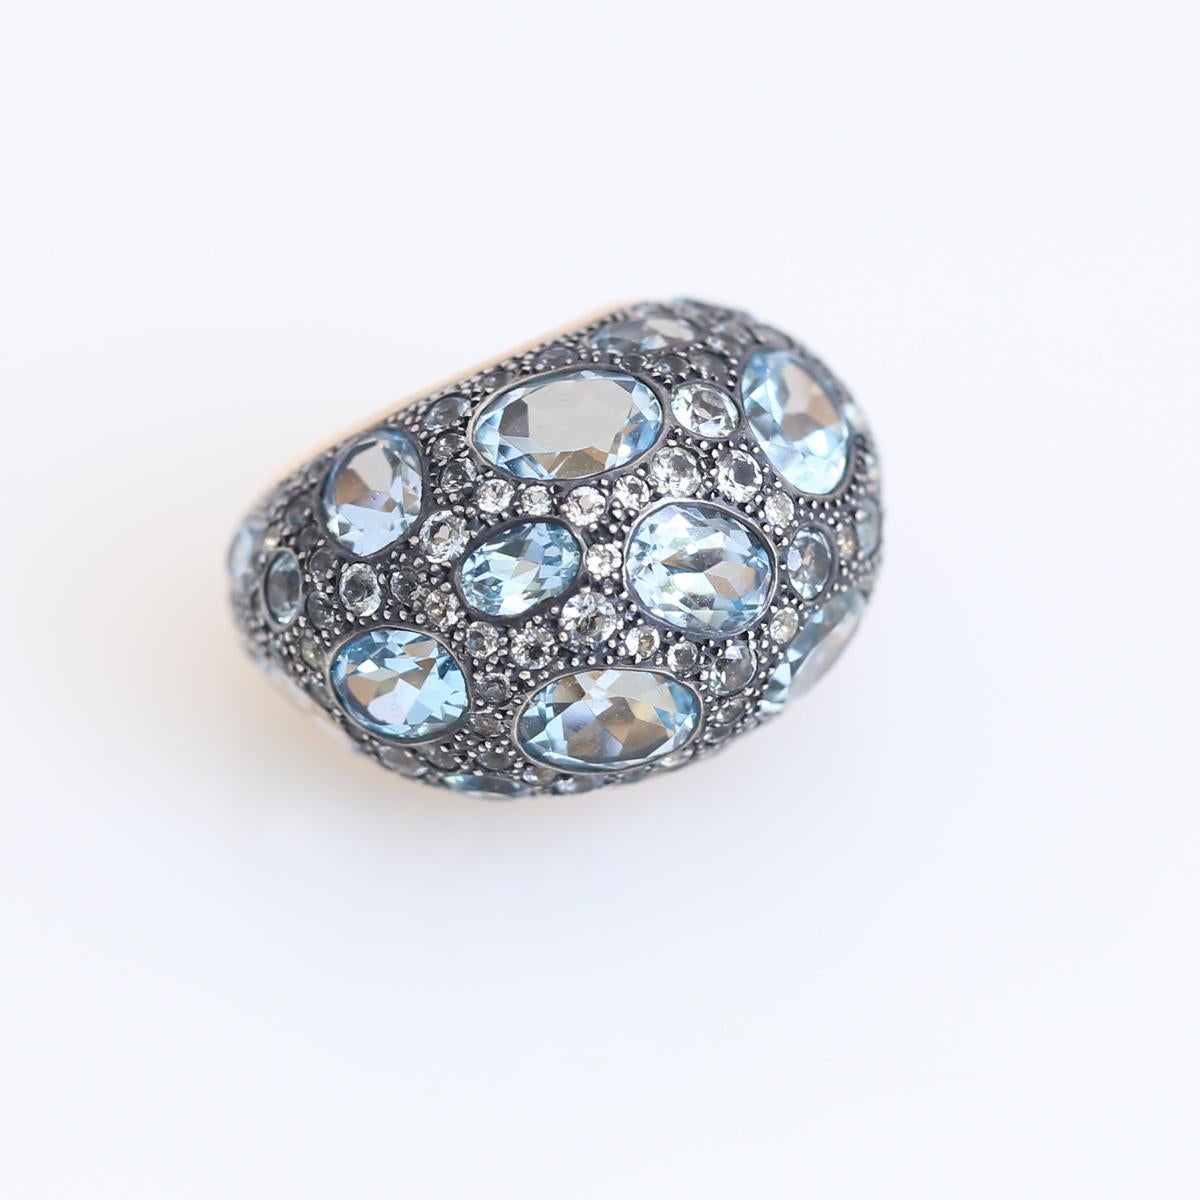 Sky Blue Topaz Ring by Pomellato Signed and in its Original Box. A magnificent bombe style ring by Pomellato. Showcasing 12 Ct of multiple shaped Topazes set in shimmering 18 Karat Rose Gold. The ring measures a size 6. Size can not be changed.